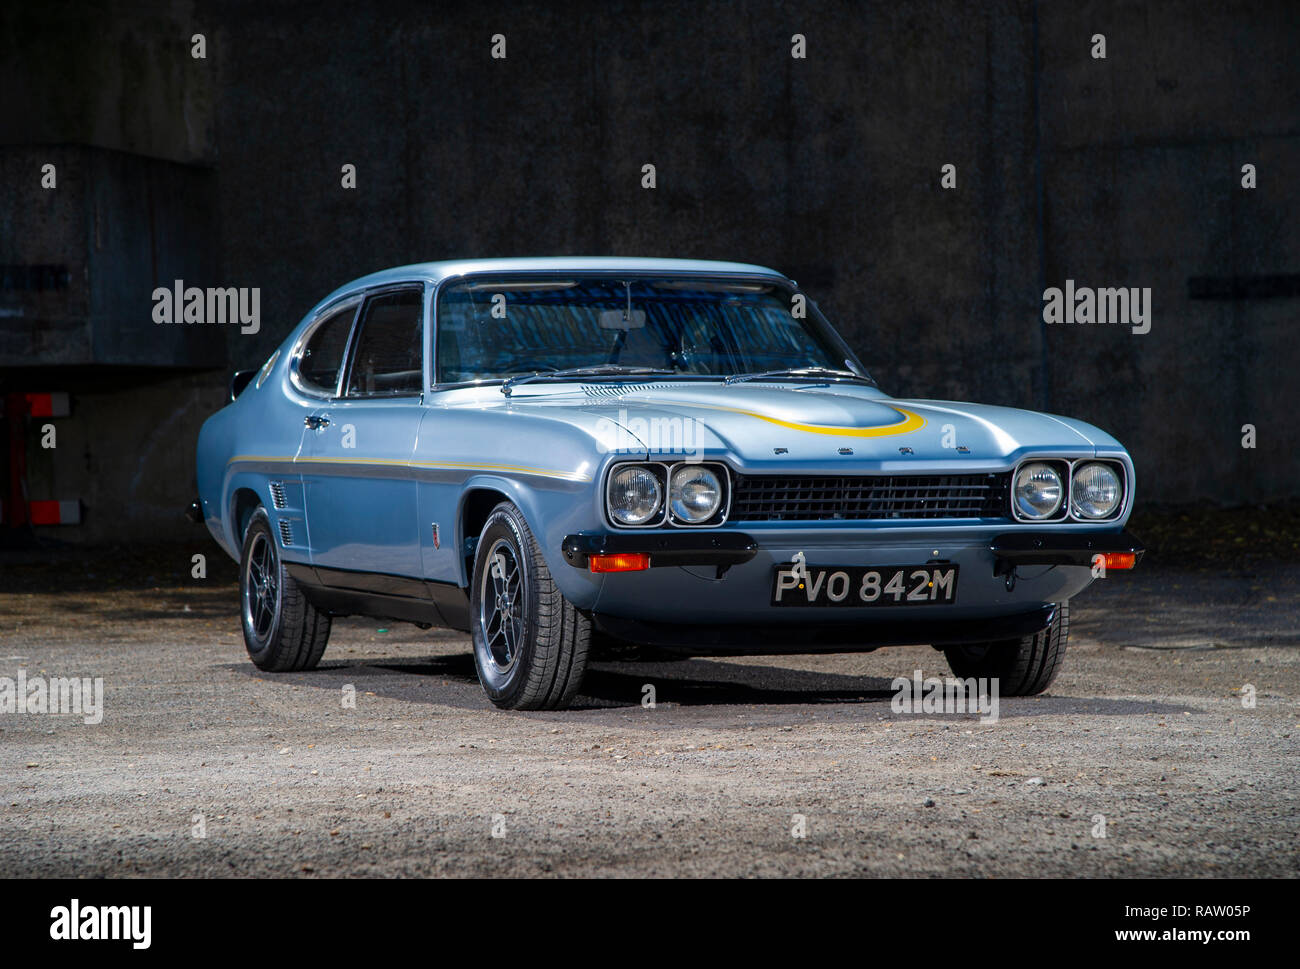 1974 Ford Capri RS 3100 GT Spa Special classic British sports car Stock Photo